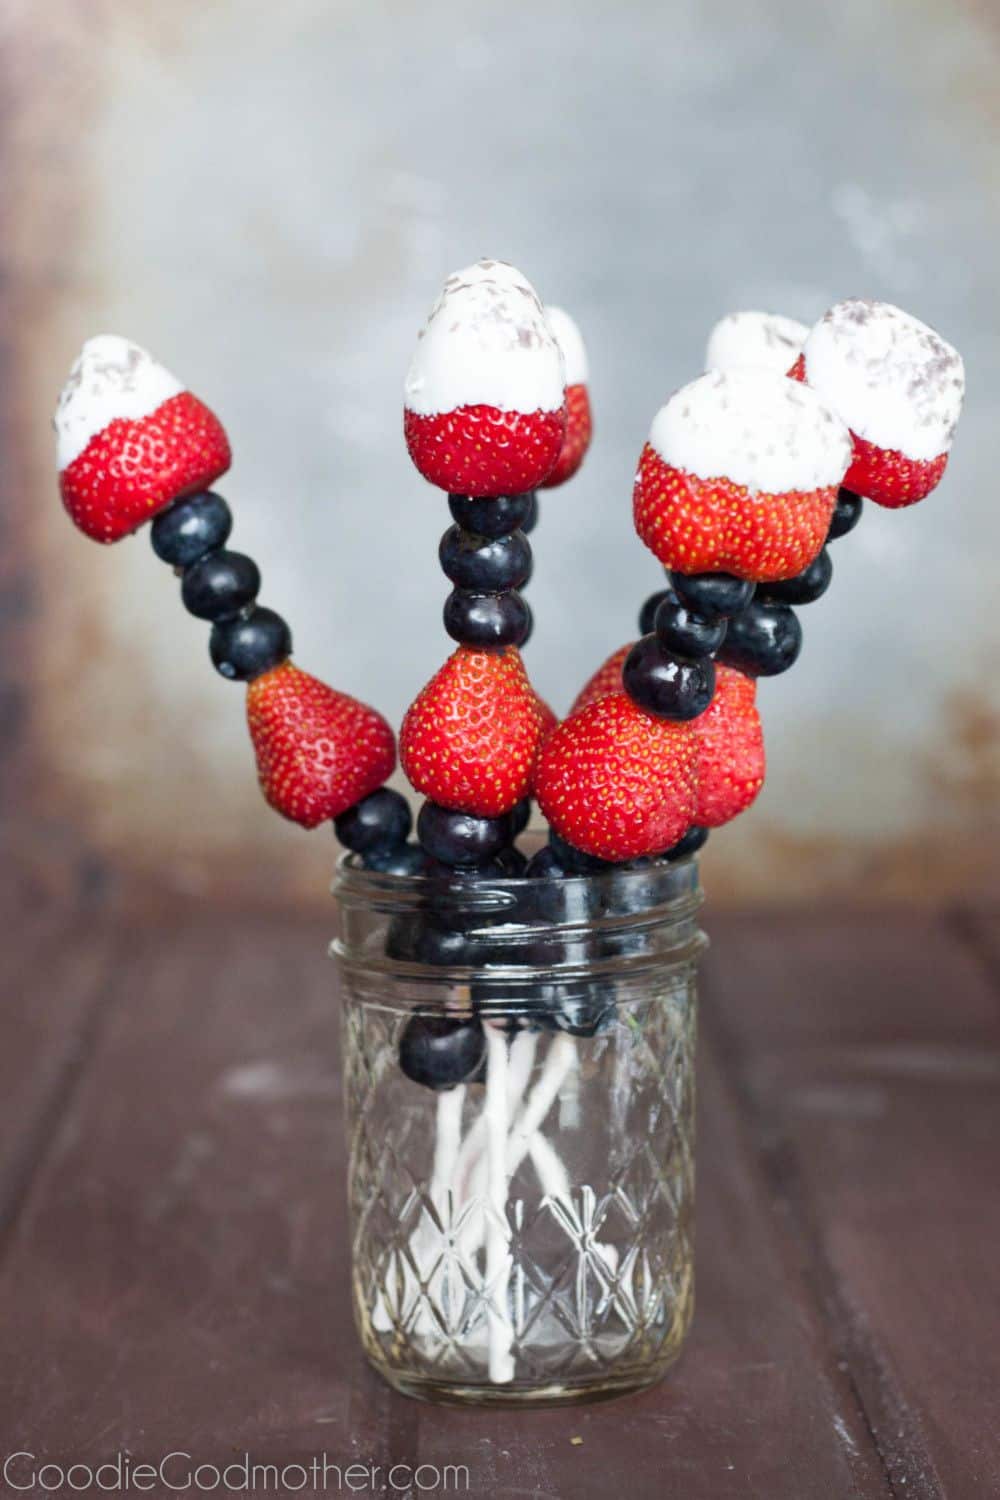 Make this healthy and easy Fourth of July dessert! Summer berry 